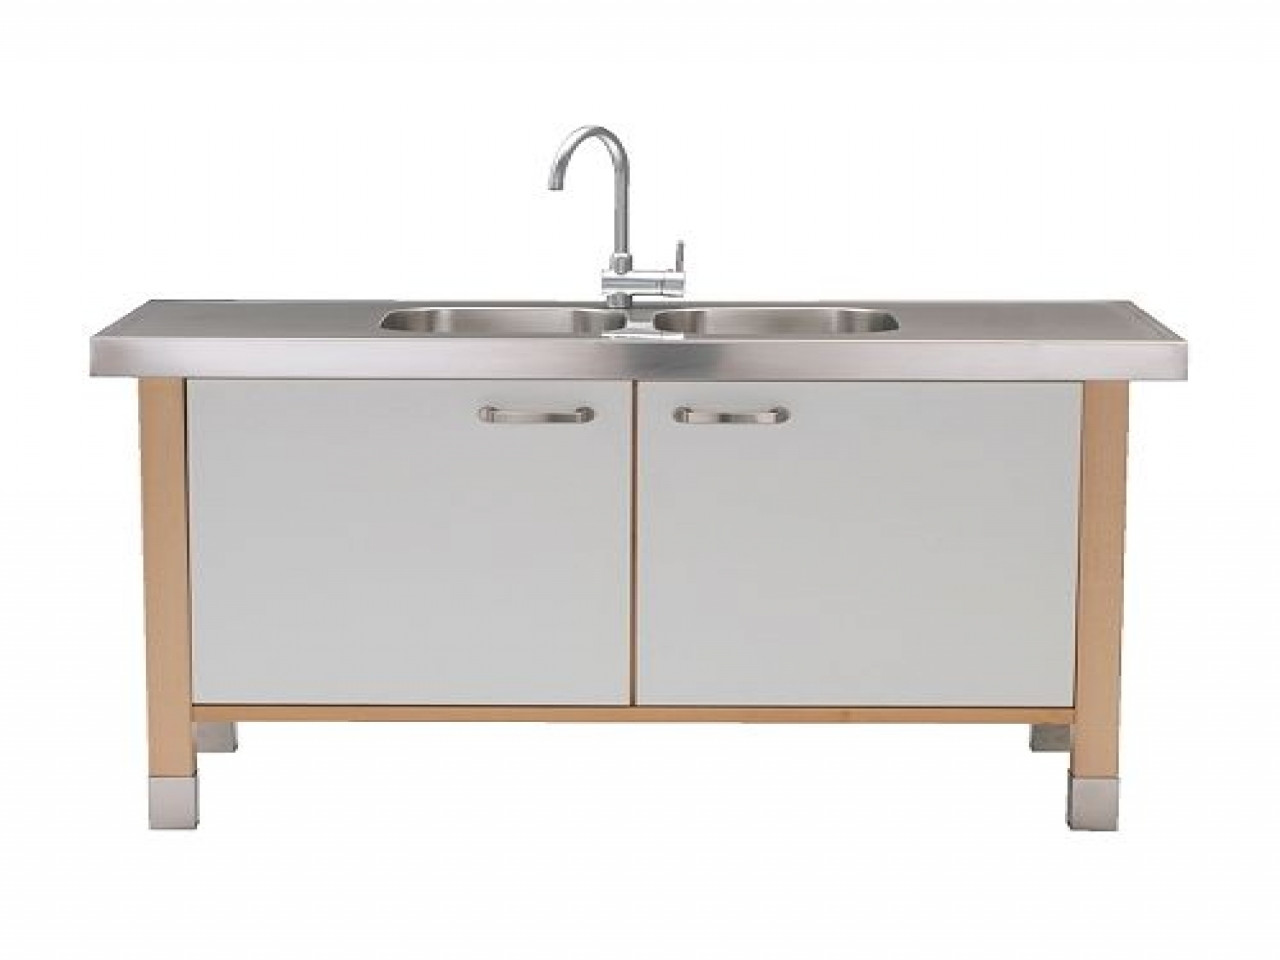 Kitchen Sink And Cabinets
 Kitchen sink and cabinet free standing kitchen cabinets